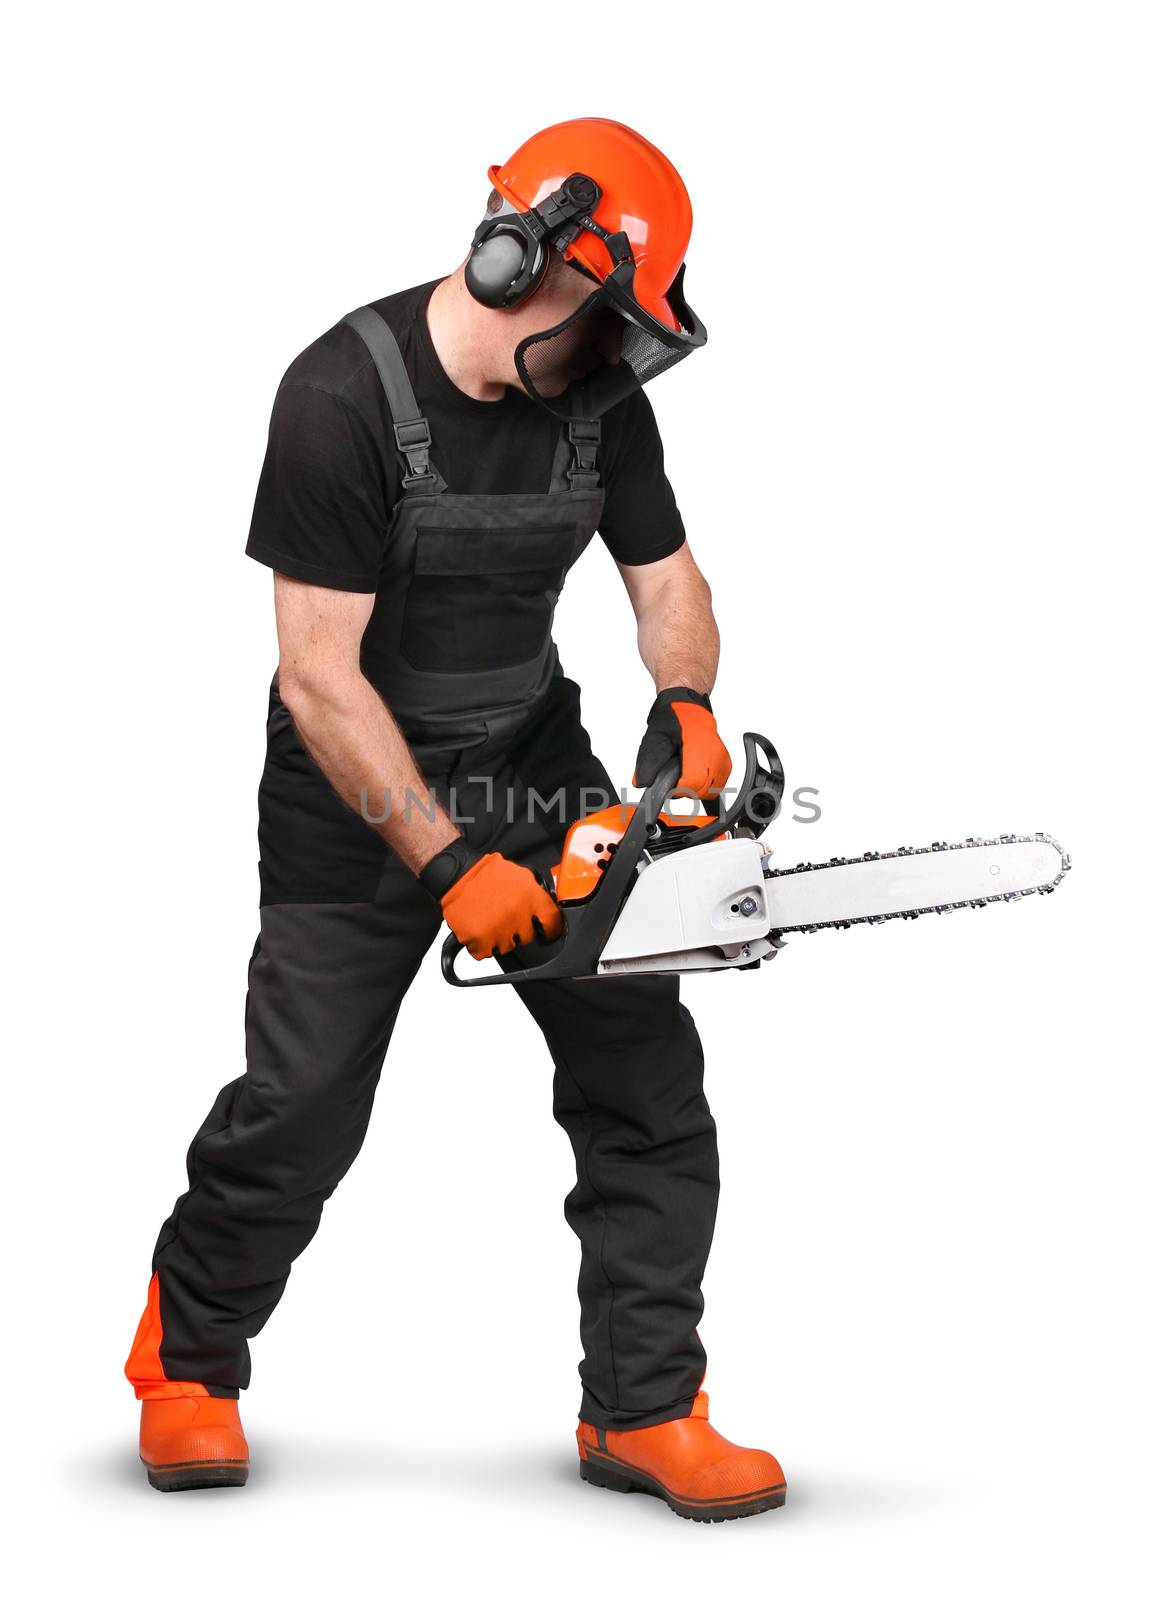 Professional logger using chain saw with safety gear on